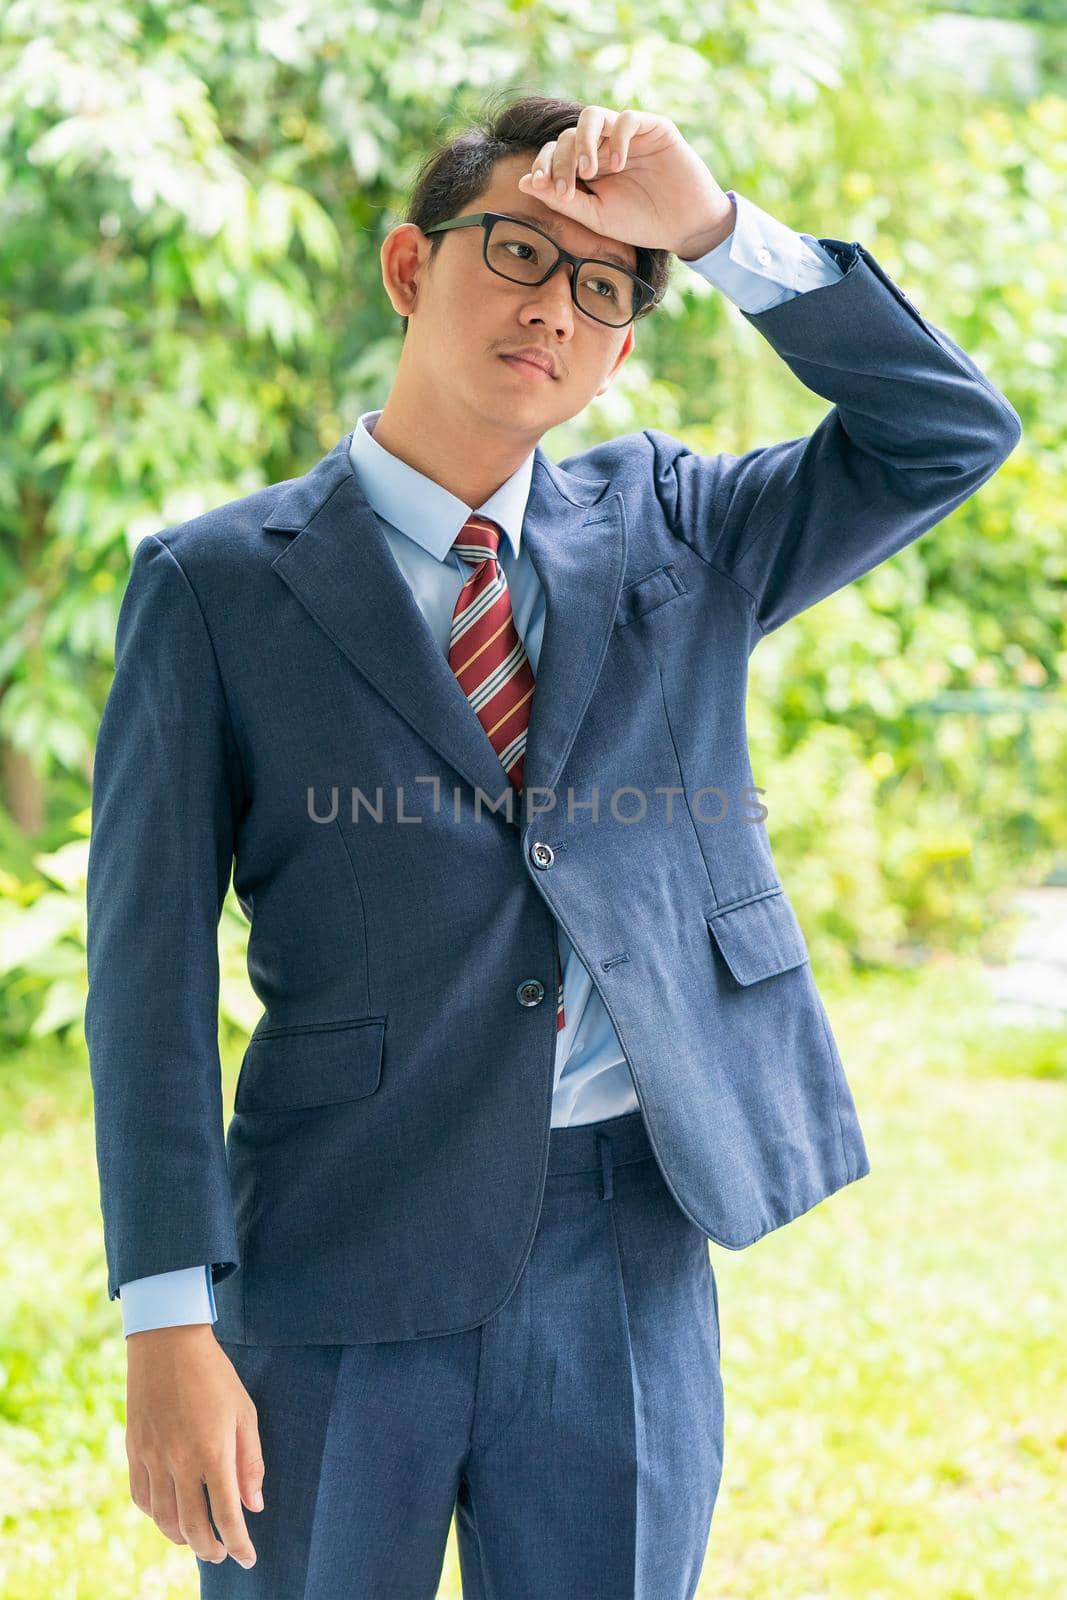 Young asian business men portrait in suit and wear eyeglasses standing outside in a park during sunny day